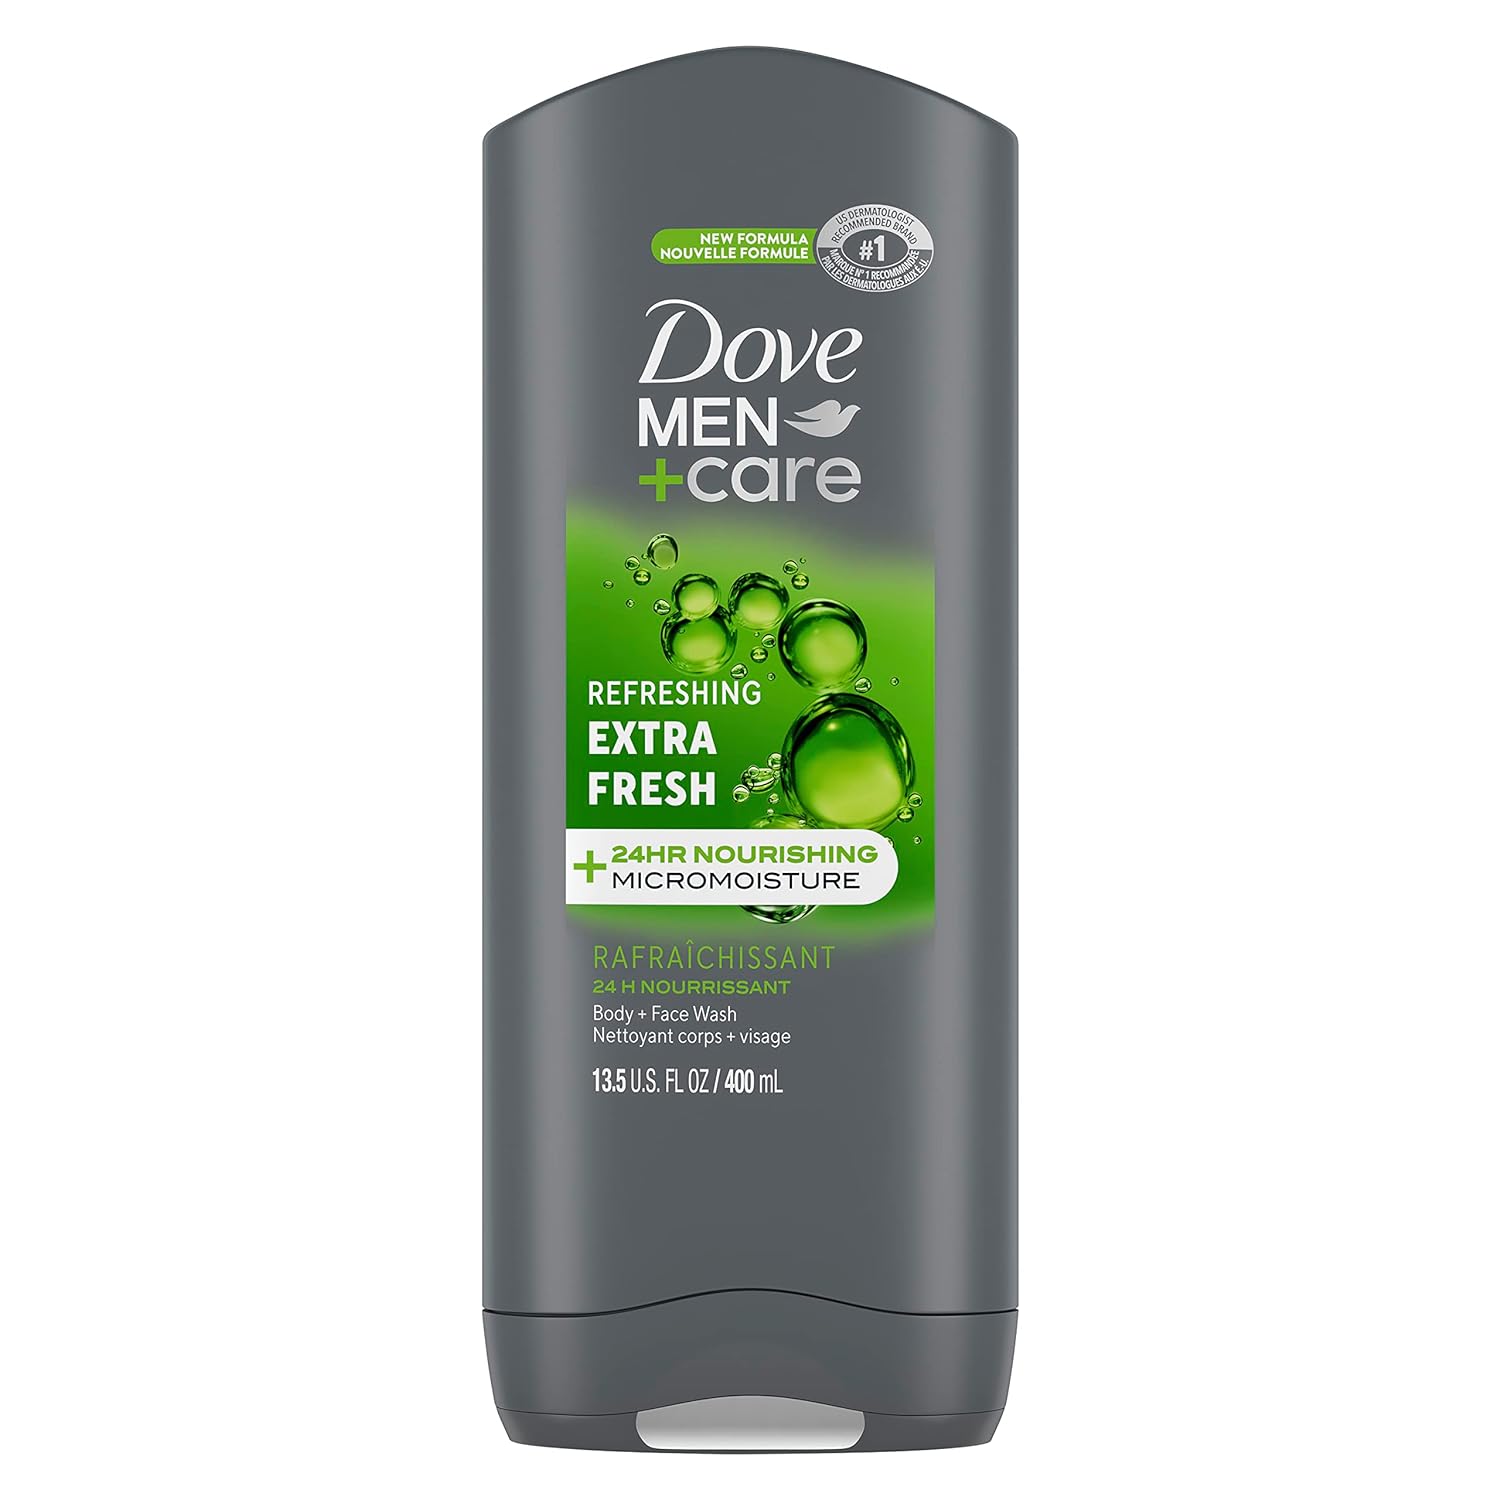 DOVE MEN + CARE Body Wash and Face For Fresh, Healthy-Feeling Skin Extra Fresh Cleanser That Effectively Washes Away Bacteria While Nourishing Your 13.5 oz